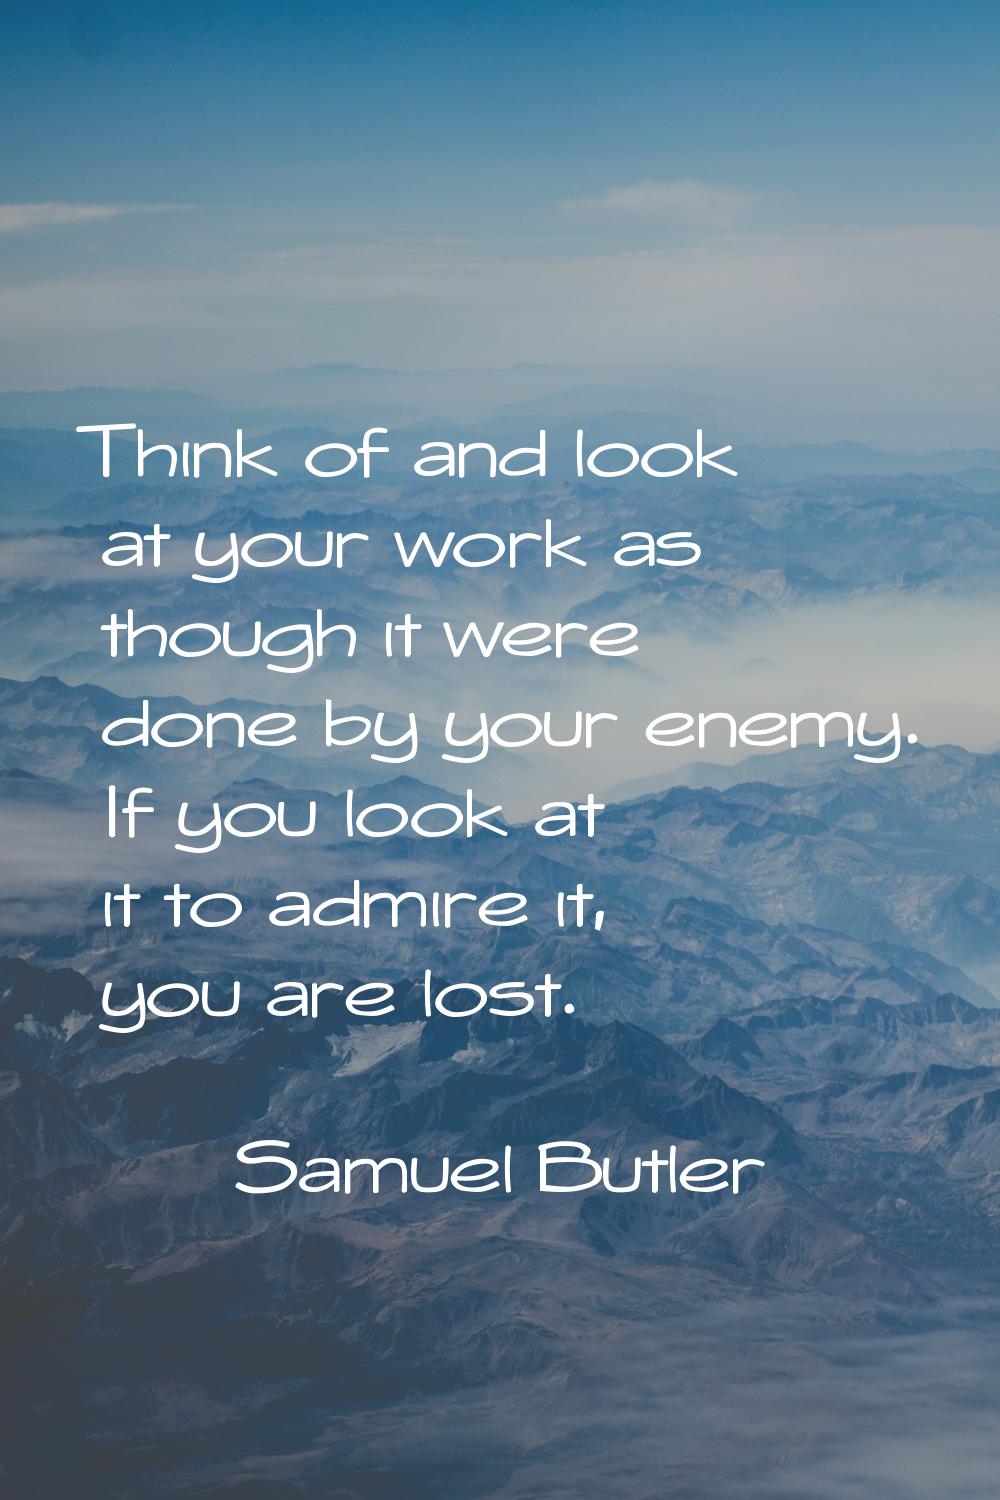 Think of and look at your work as though it were done by your enemy. If you look at it to admire it